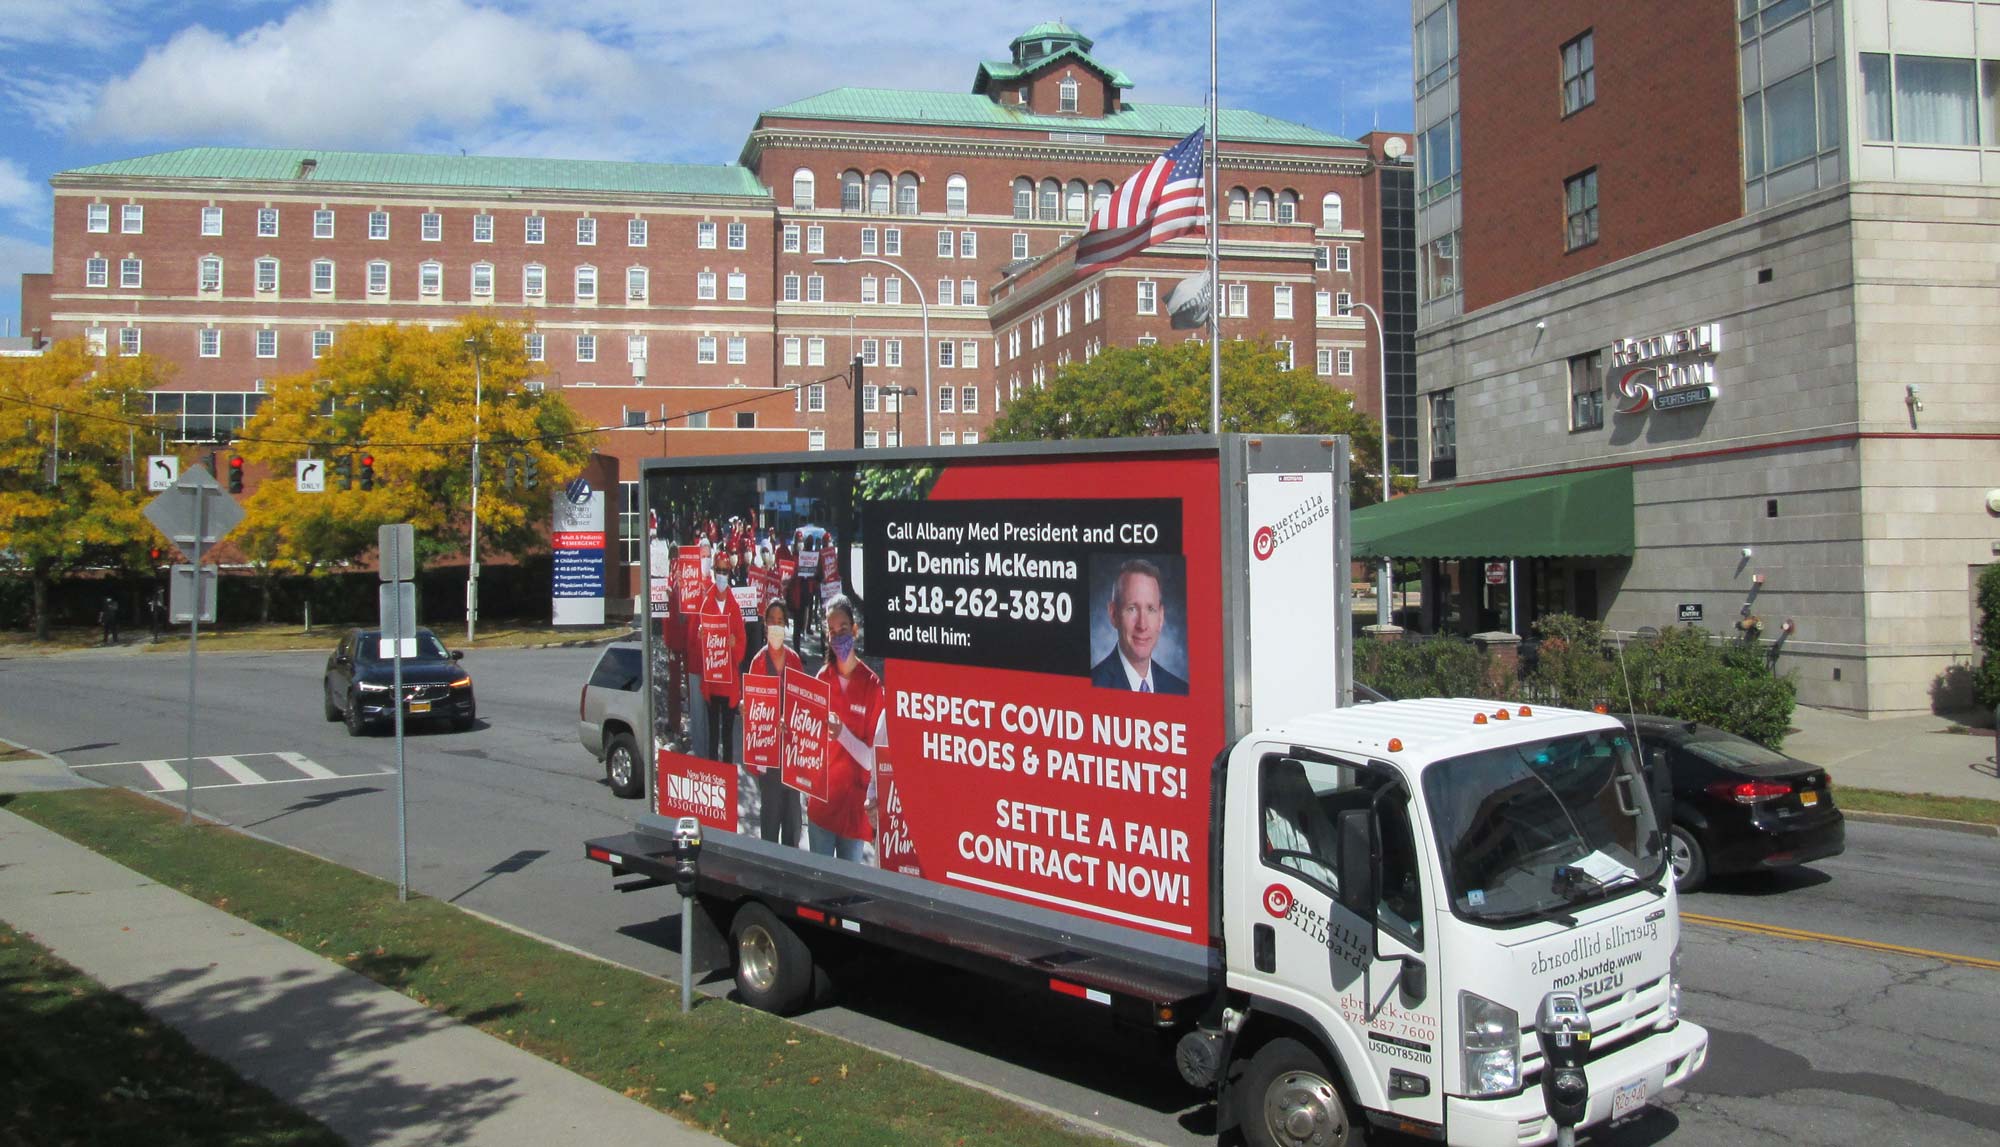 Mobile billboard ad promoting contract settlement for NYSNA